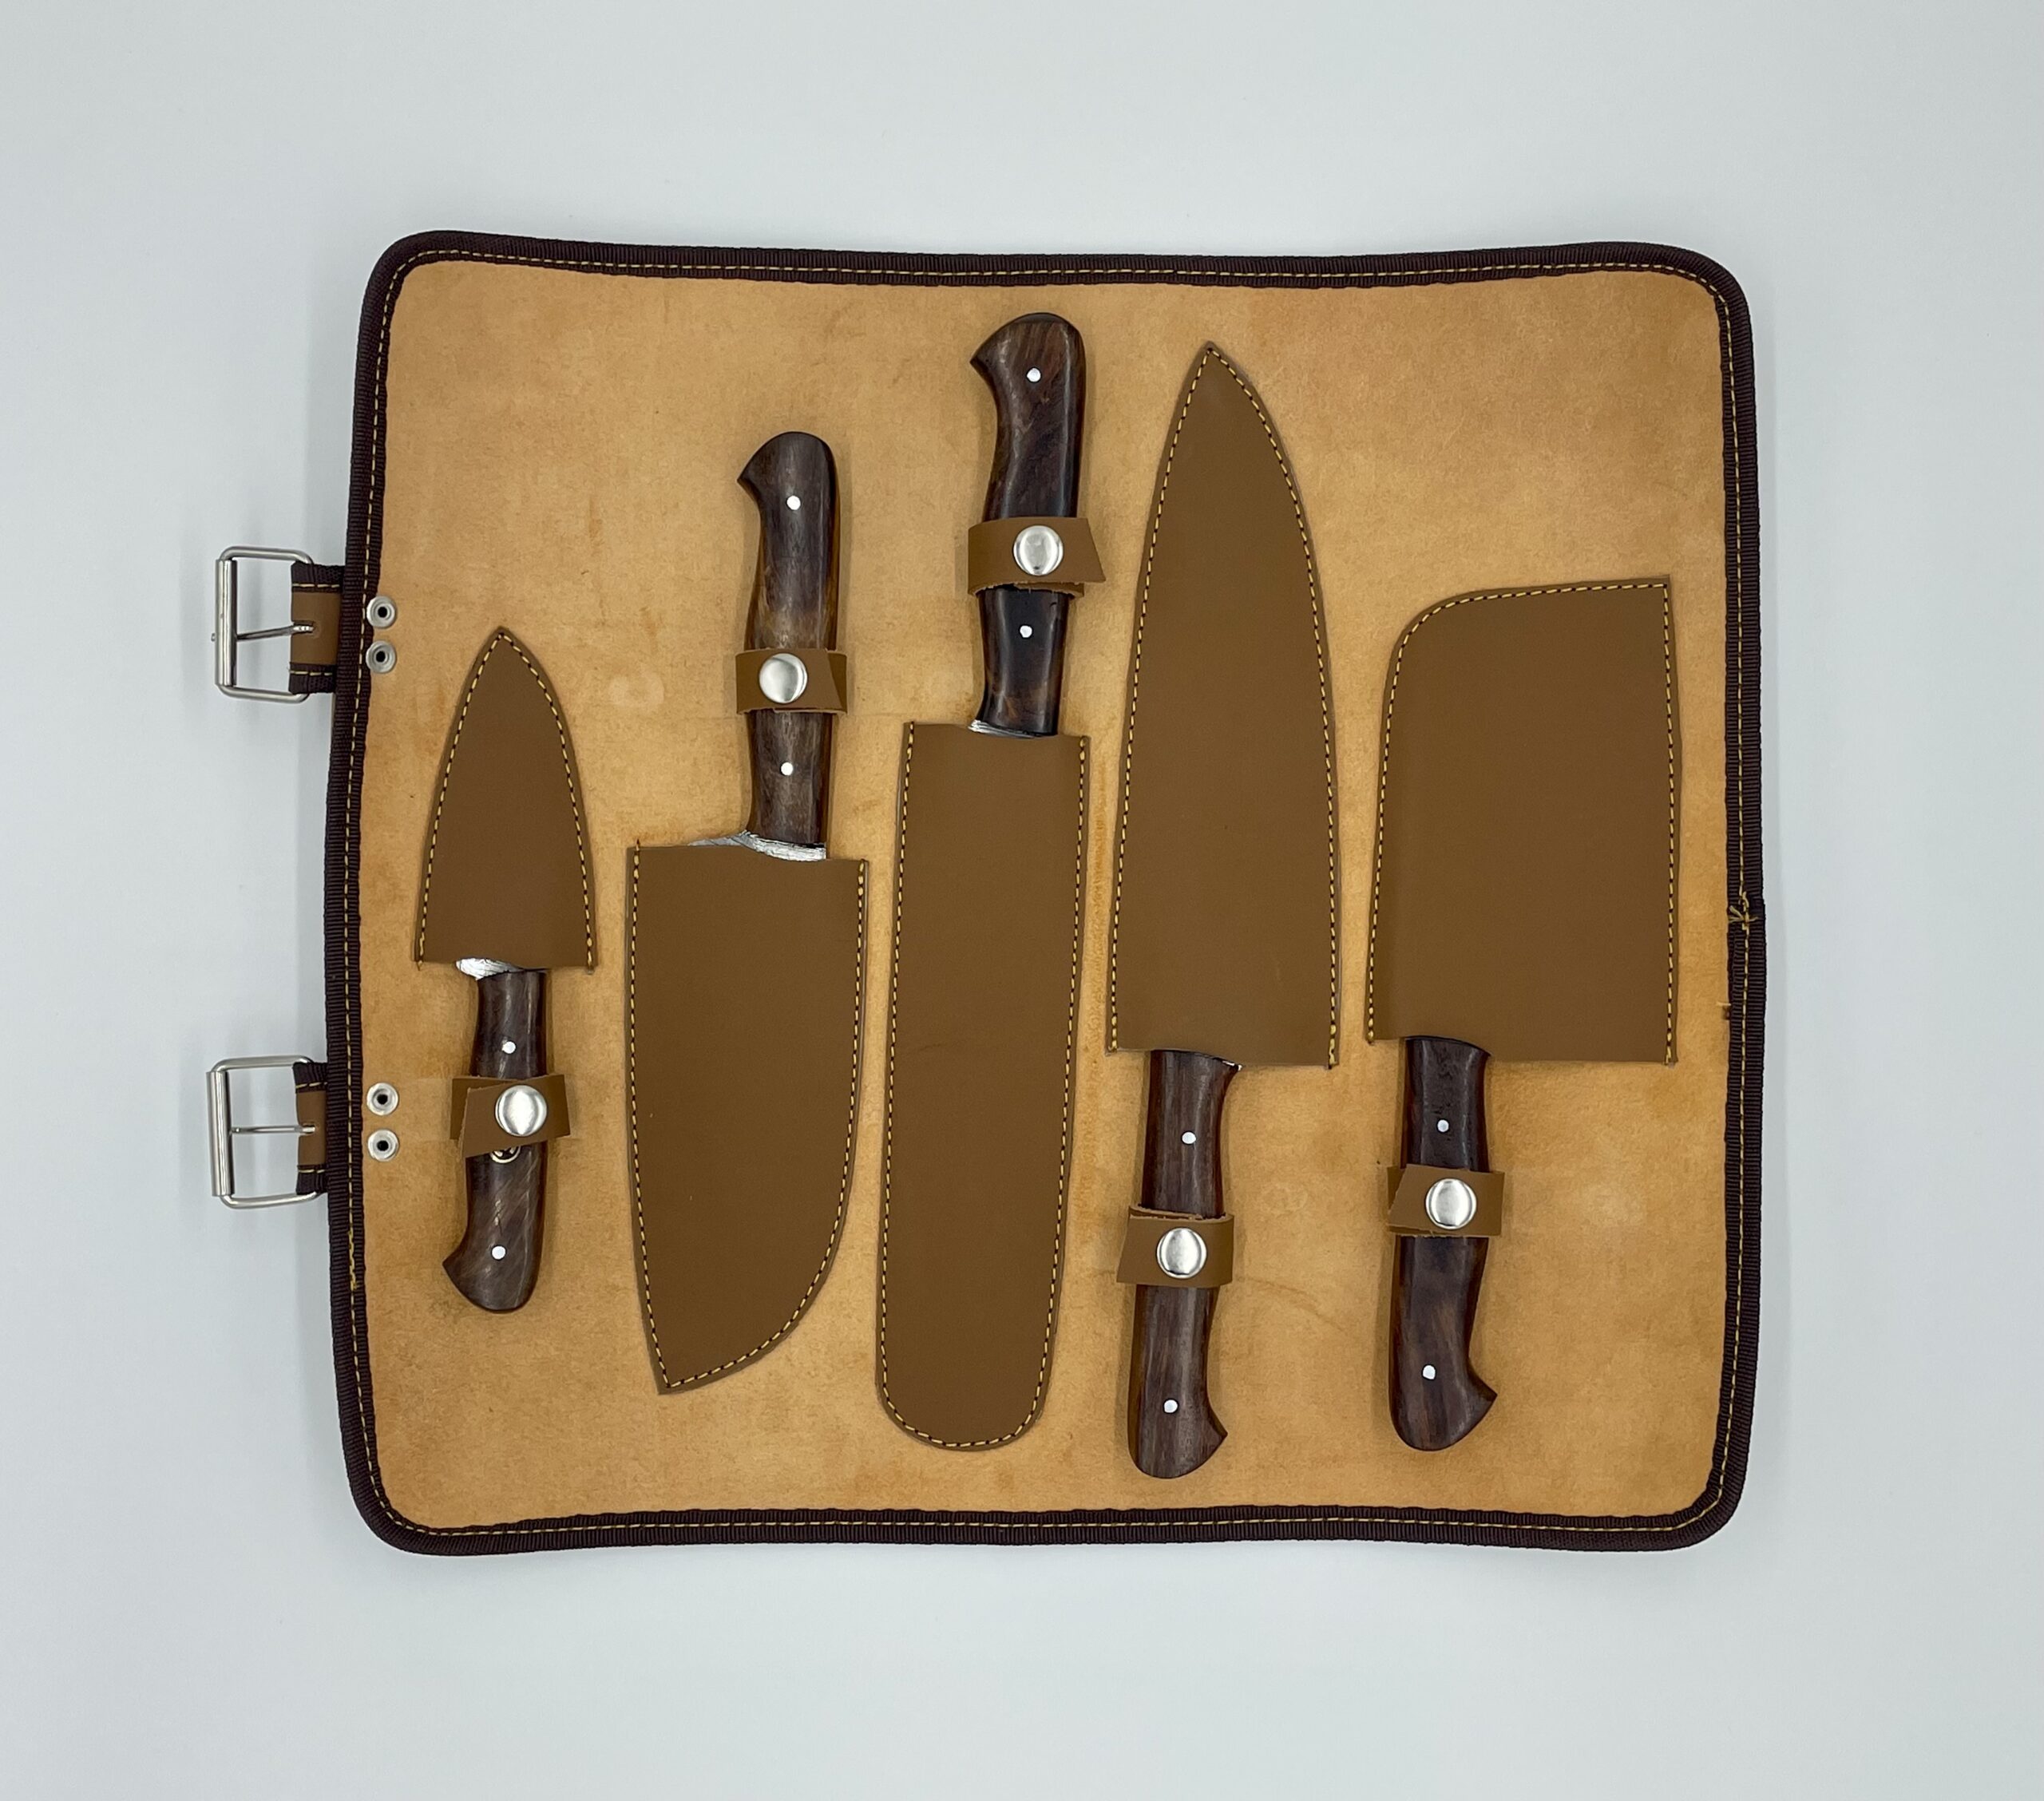 Carbon Steel Chef Knife Set With Rolling Leather Bag Blue